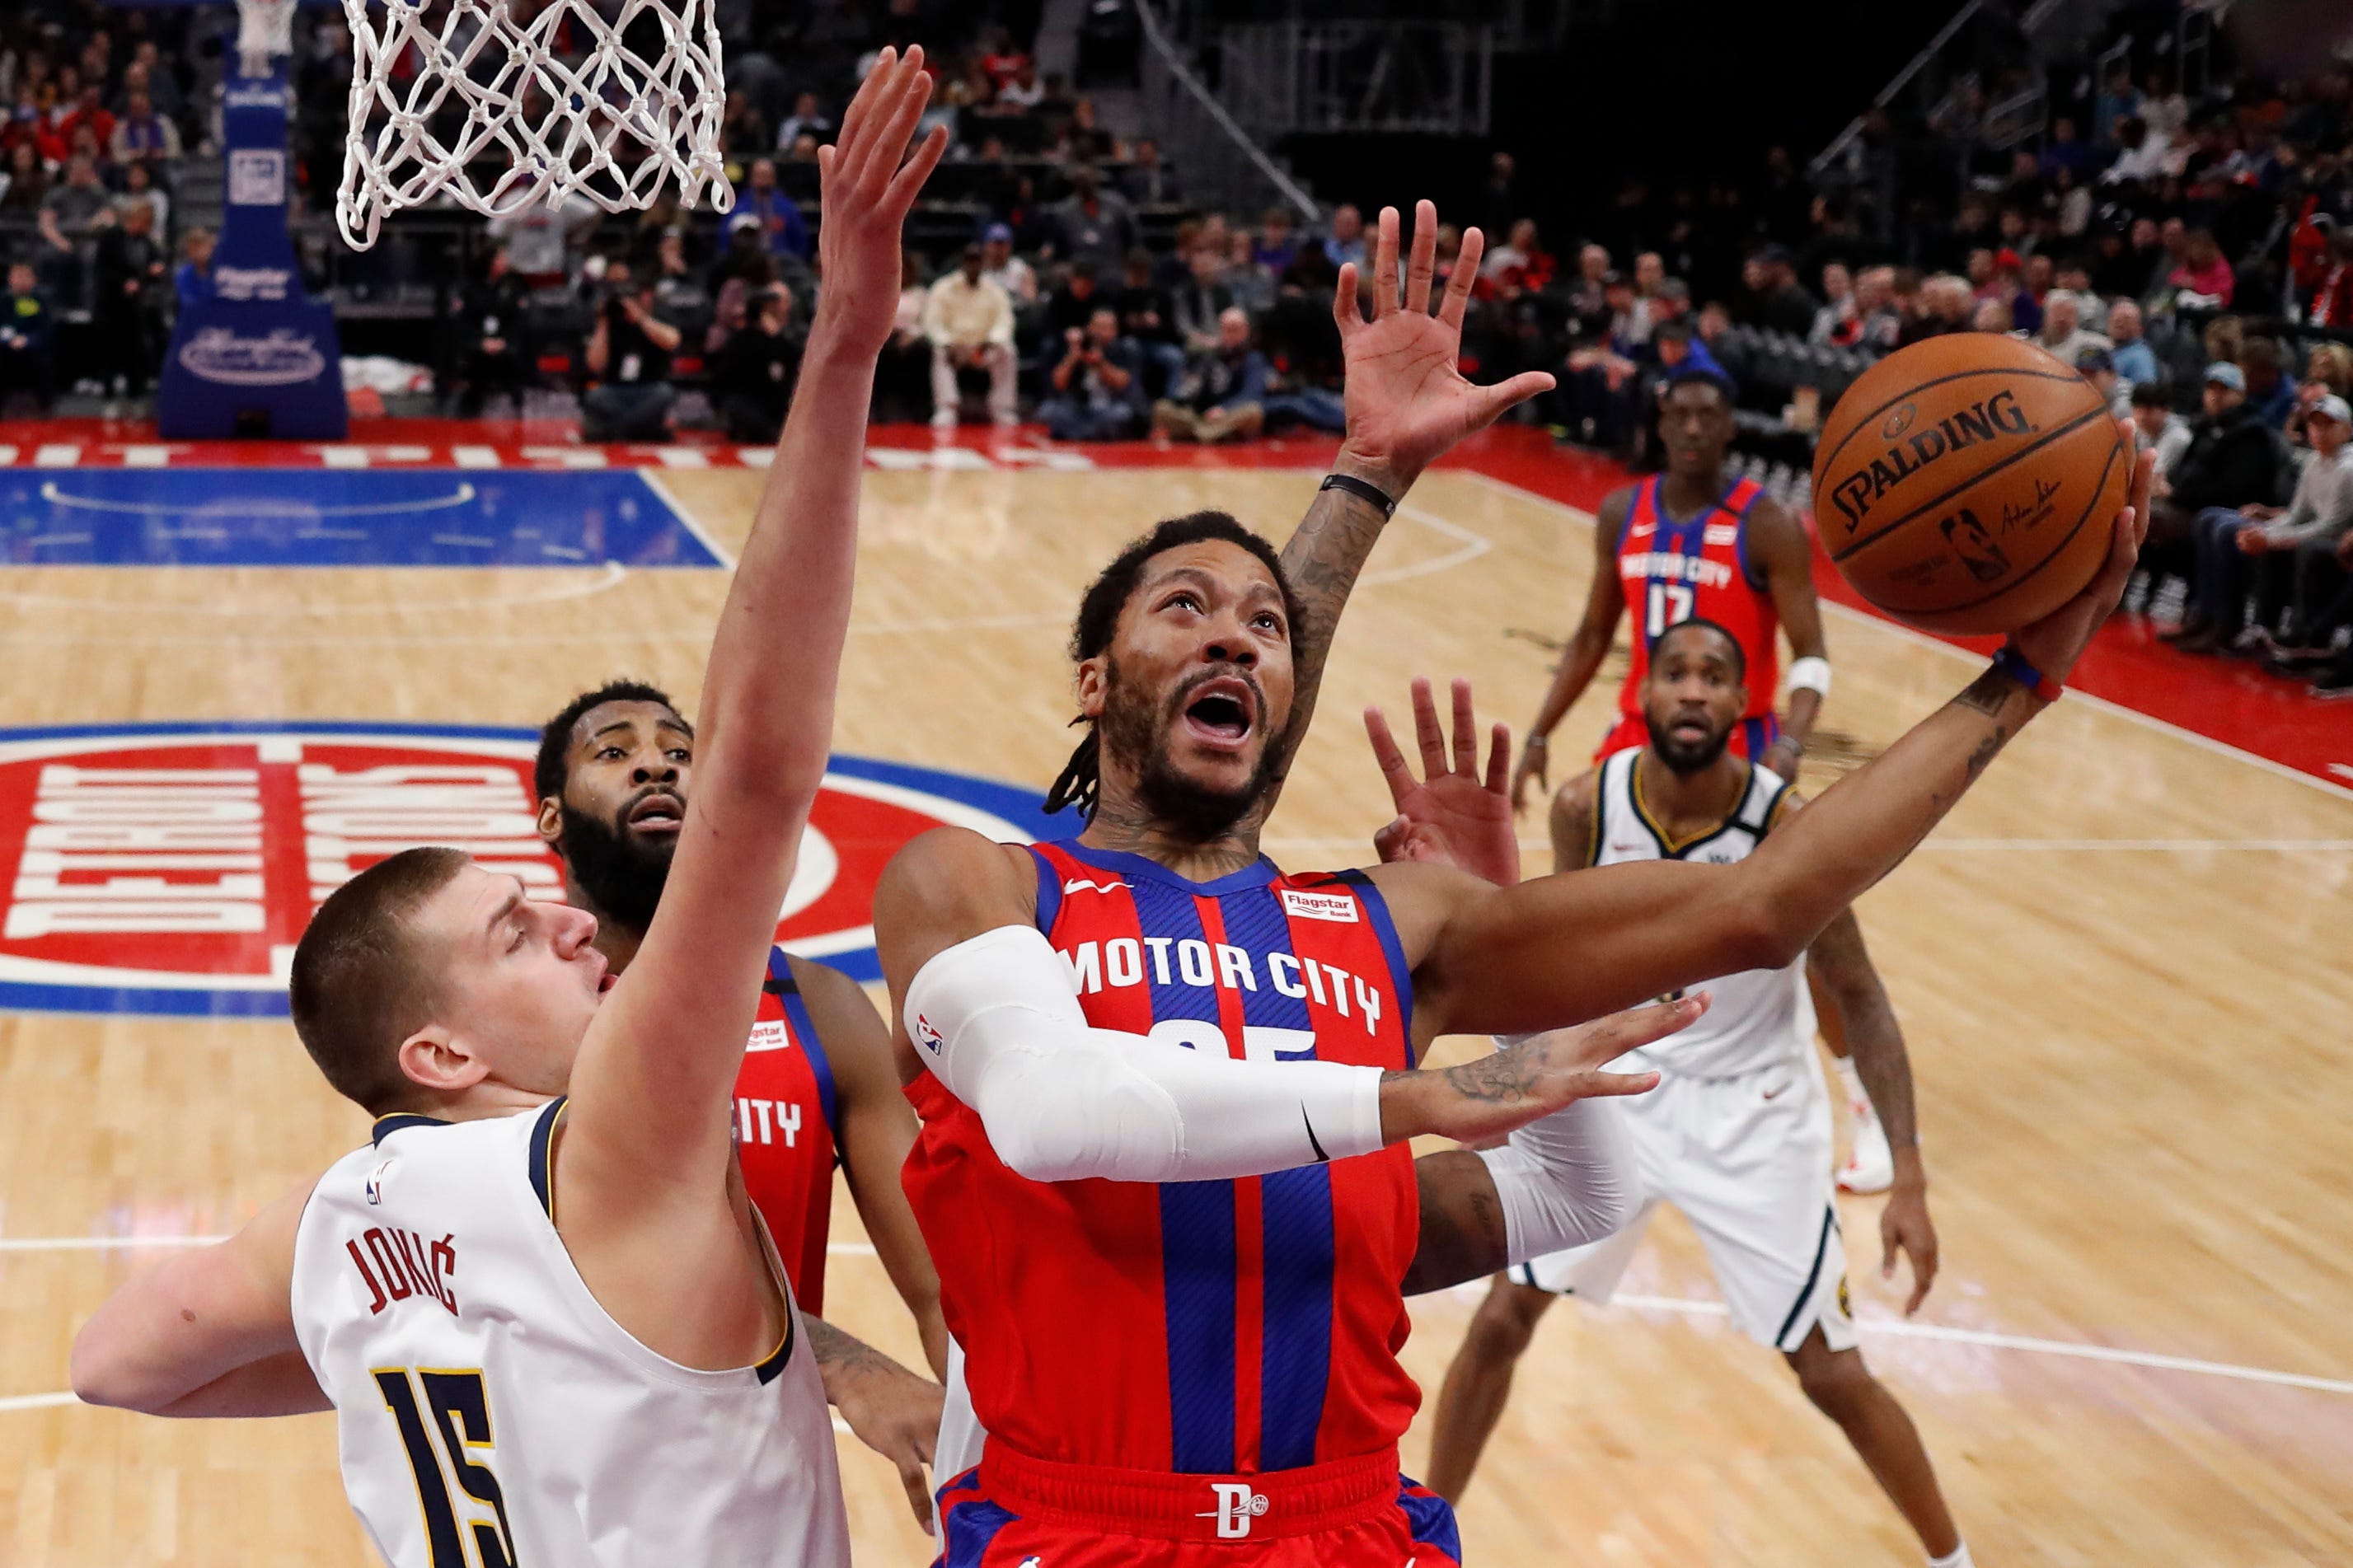 Detroit Pistons guard Derrick Rose attempts a layup as Denver Nuggets center Nikola Jokic (15) defends during the first half of an NBA basketball game, Sunday, Feb. 2, 2020, in Detroit. Detroit defeated Denver 128-123 in overtime.